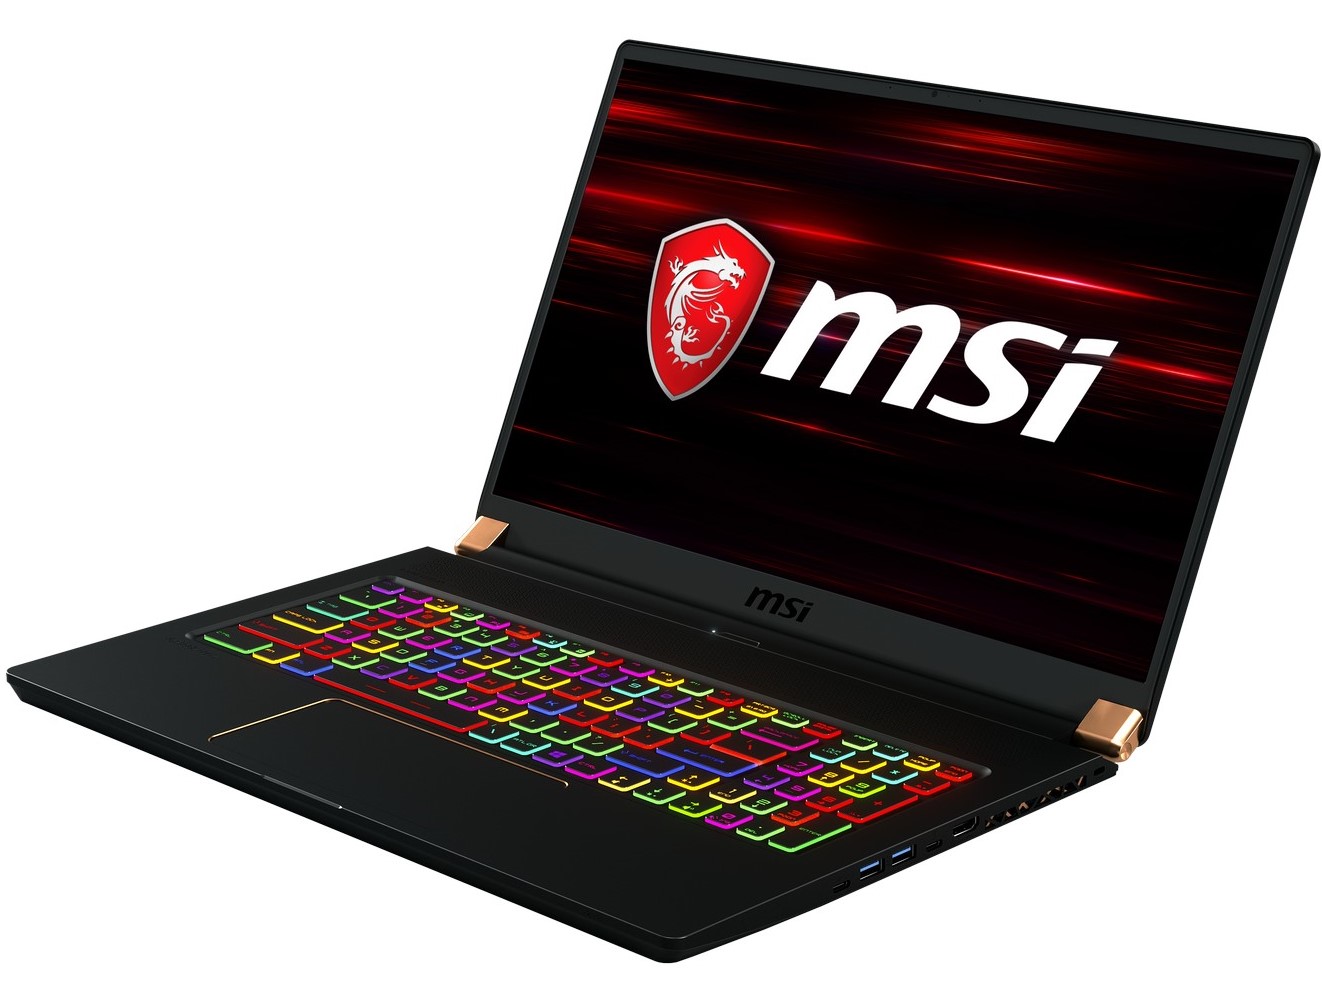 MSI raises its gaming laptops to a new level with NVIDIA GeForce RTX